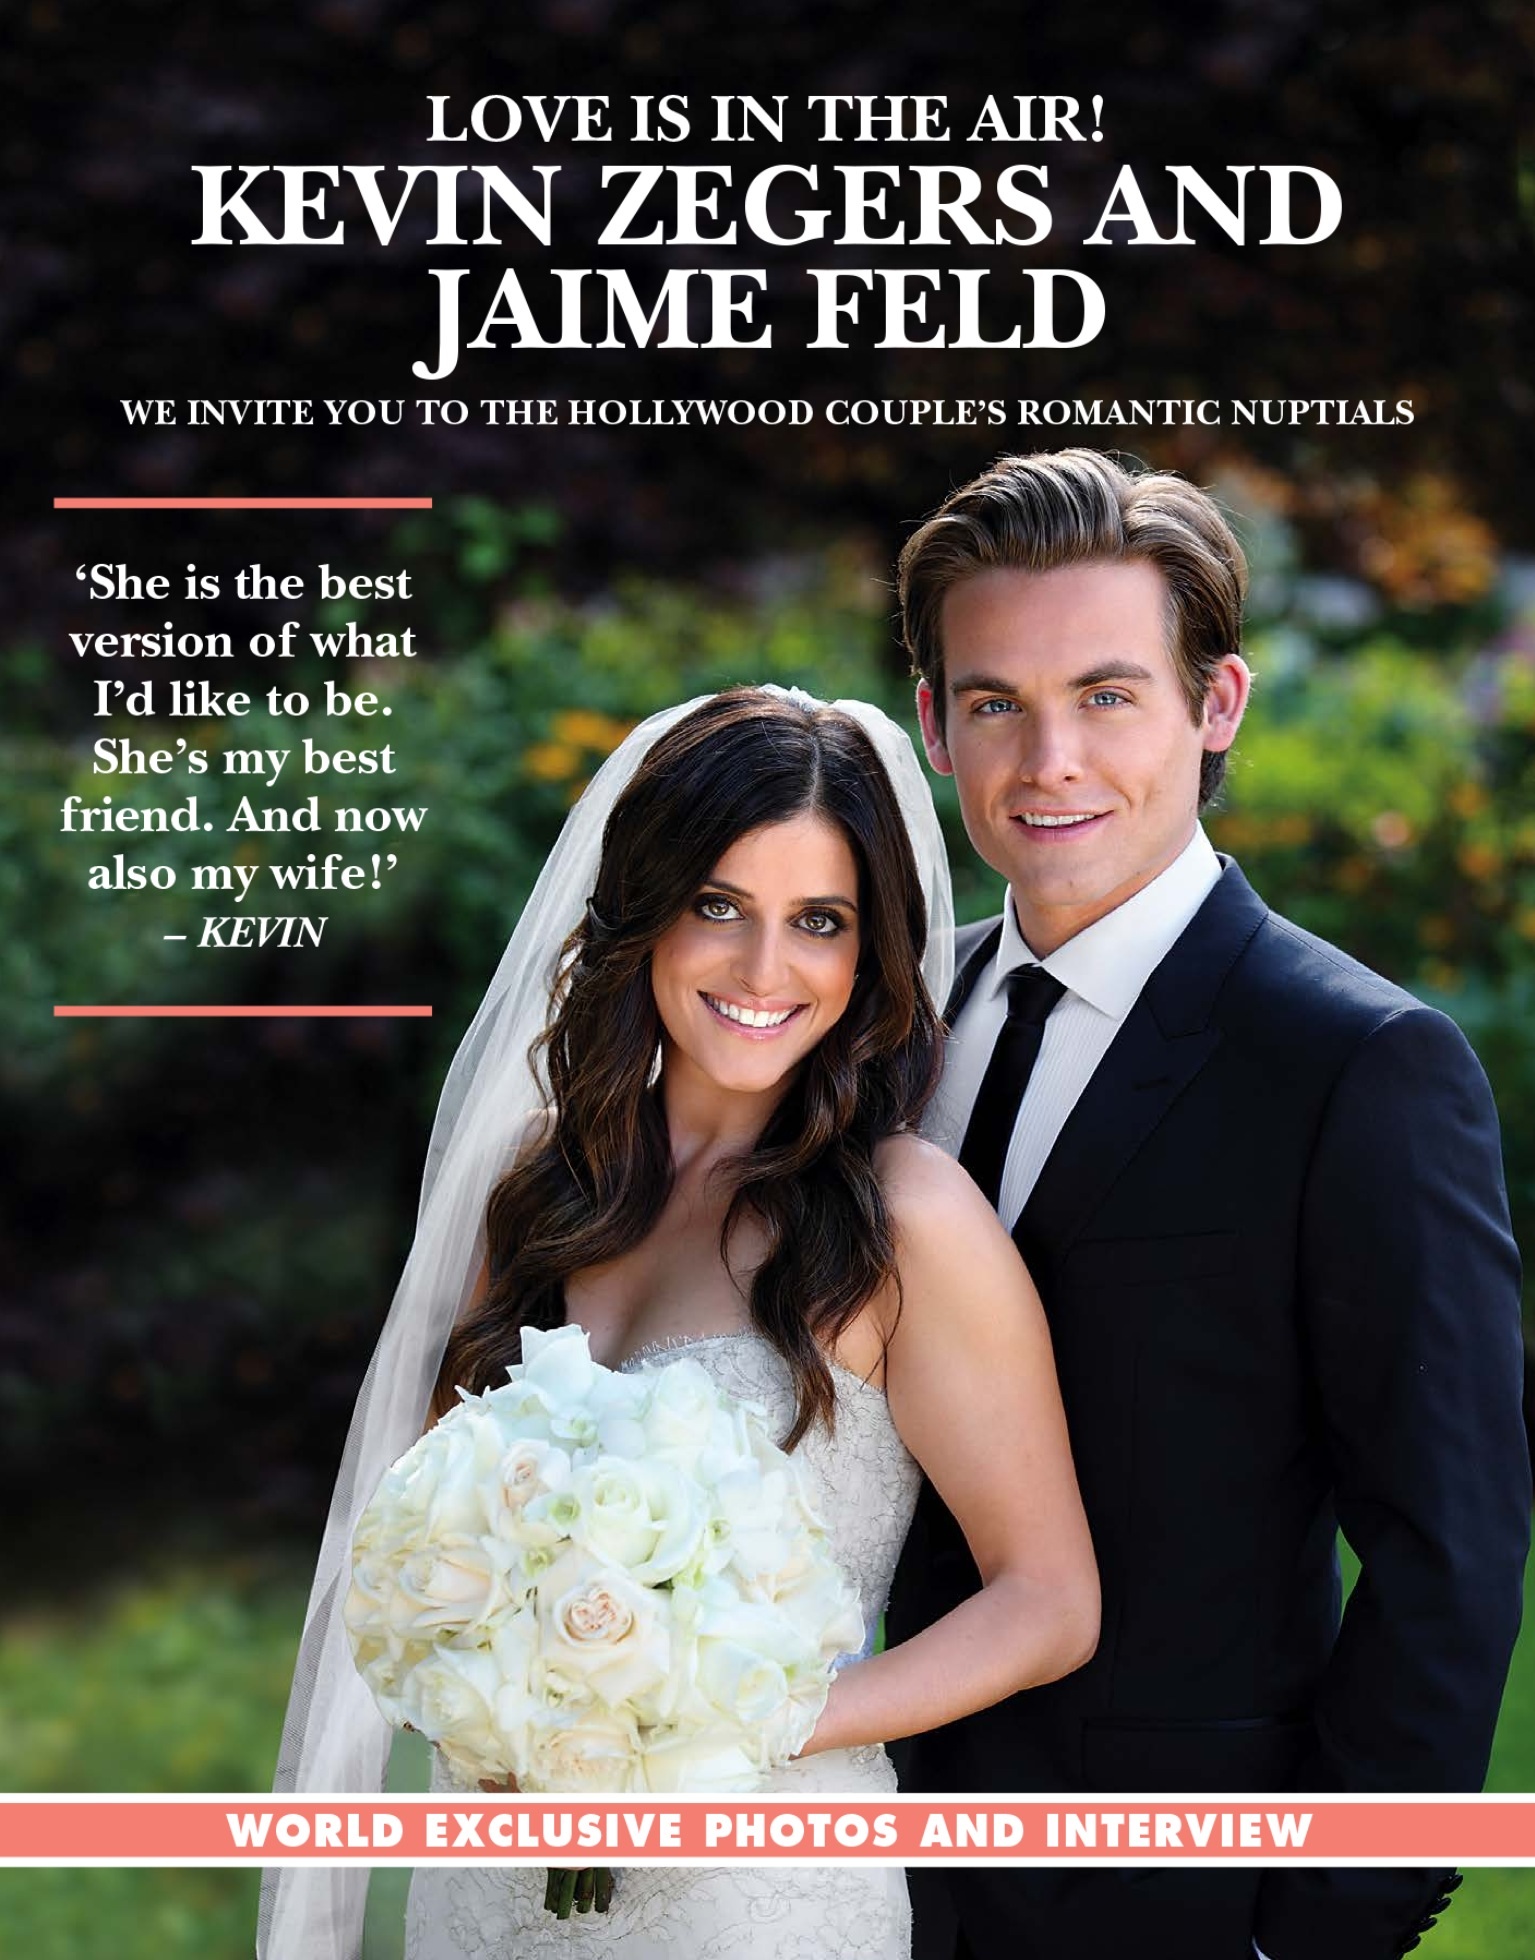 Kevin and Jaime's wedding [magazine scans]